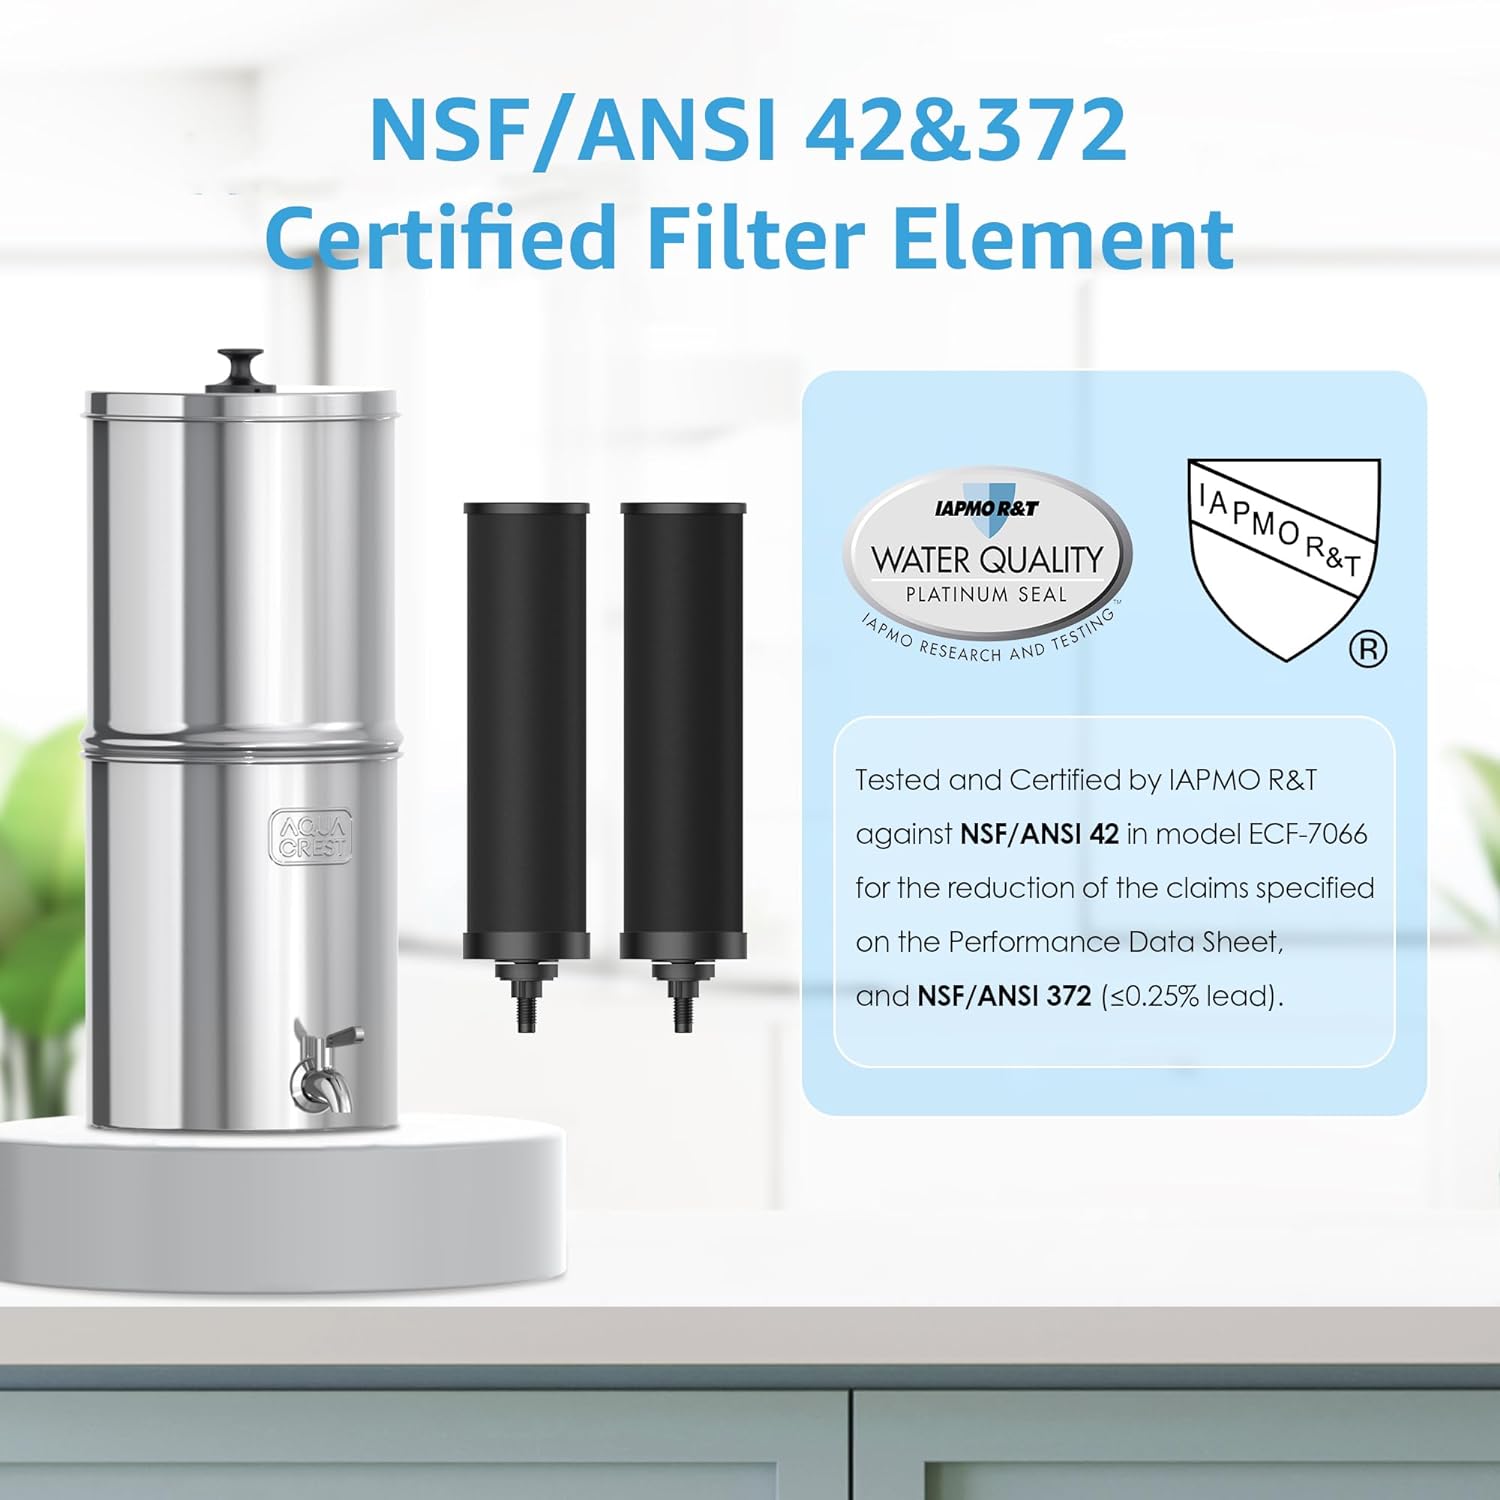 Gravity Water Filter System, NSF/ANSI 42&372 Certified Black Carbon Filters, Reduce Lead and Up to 99% Chlorine, 2.25G, for Home, Camping, RVing, Off-Grid, Emergencies, AQ-TN-A